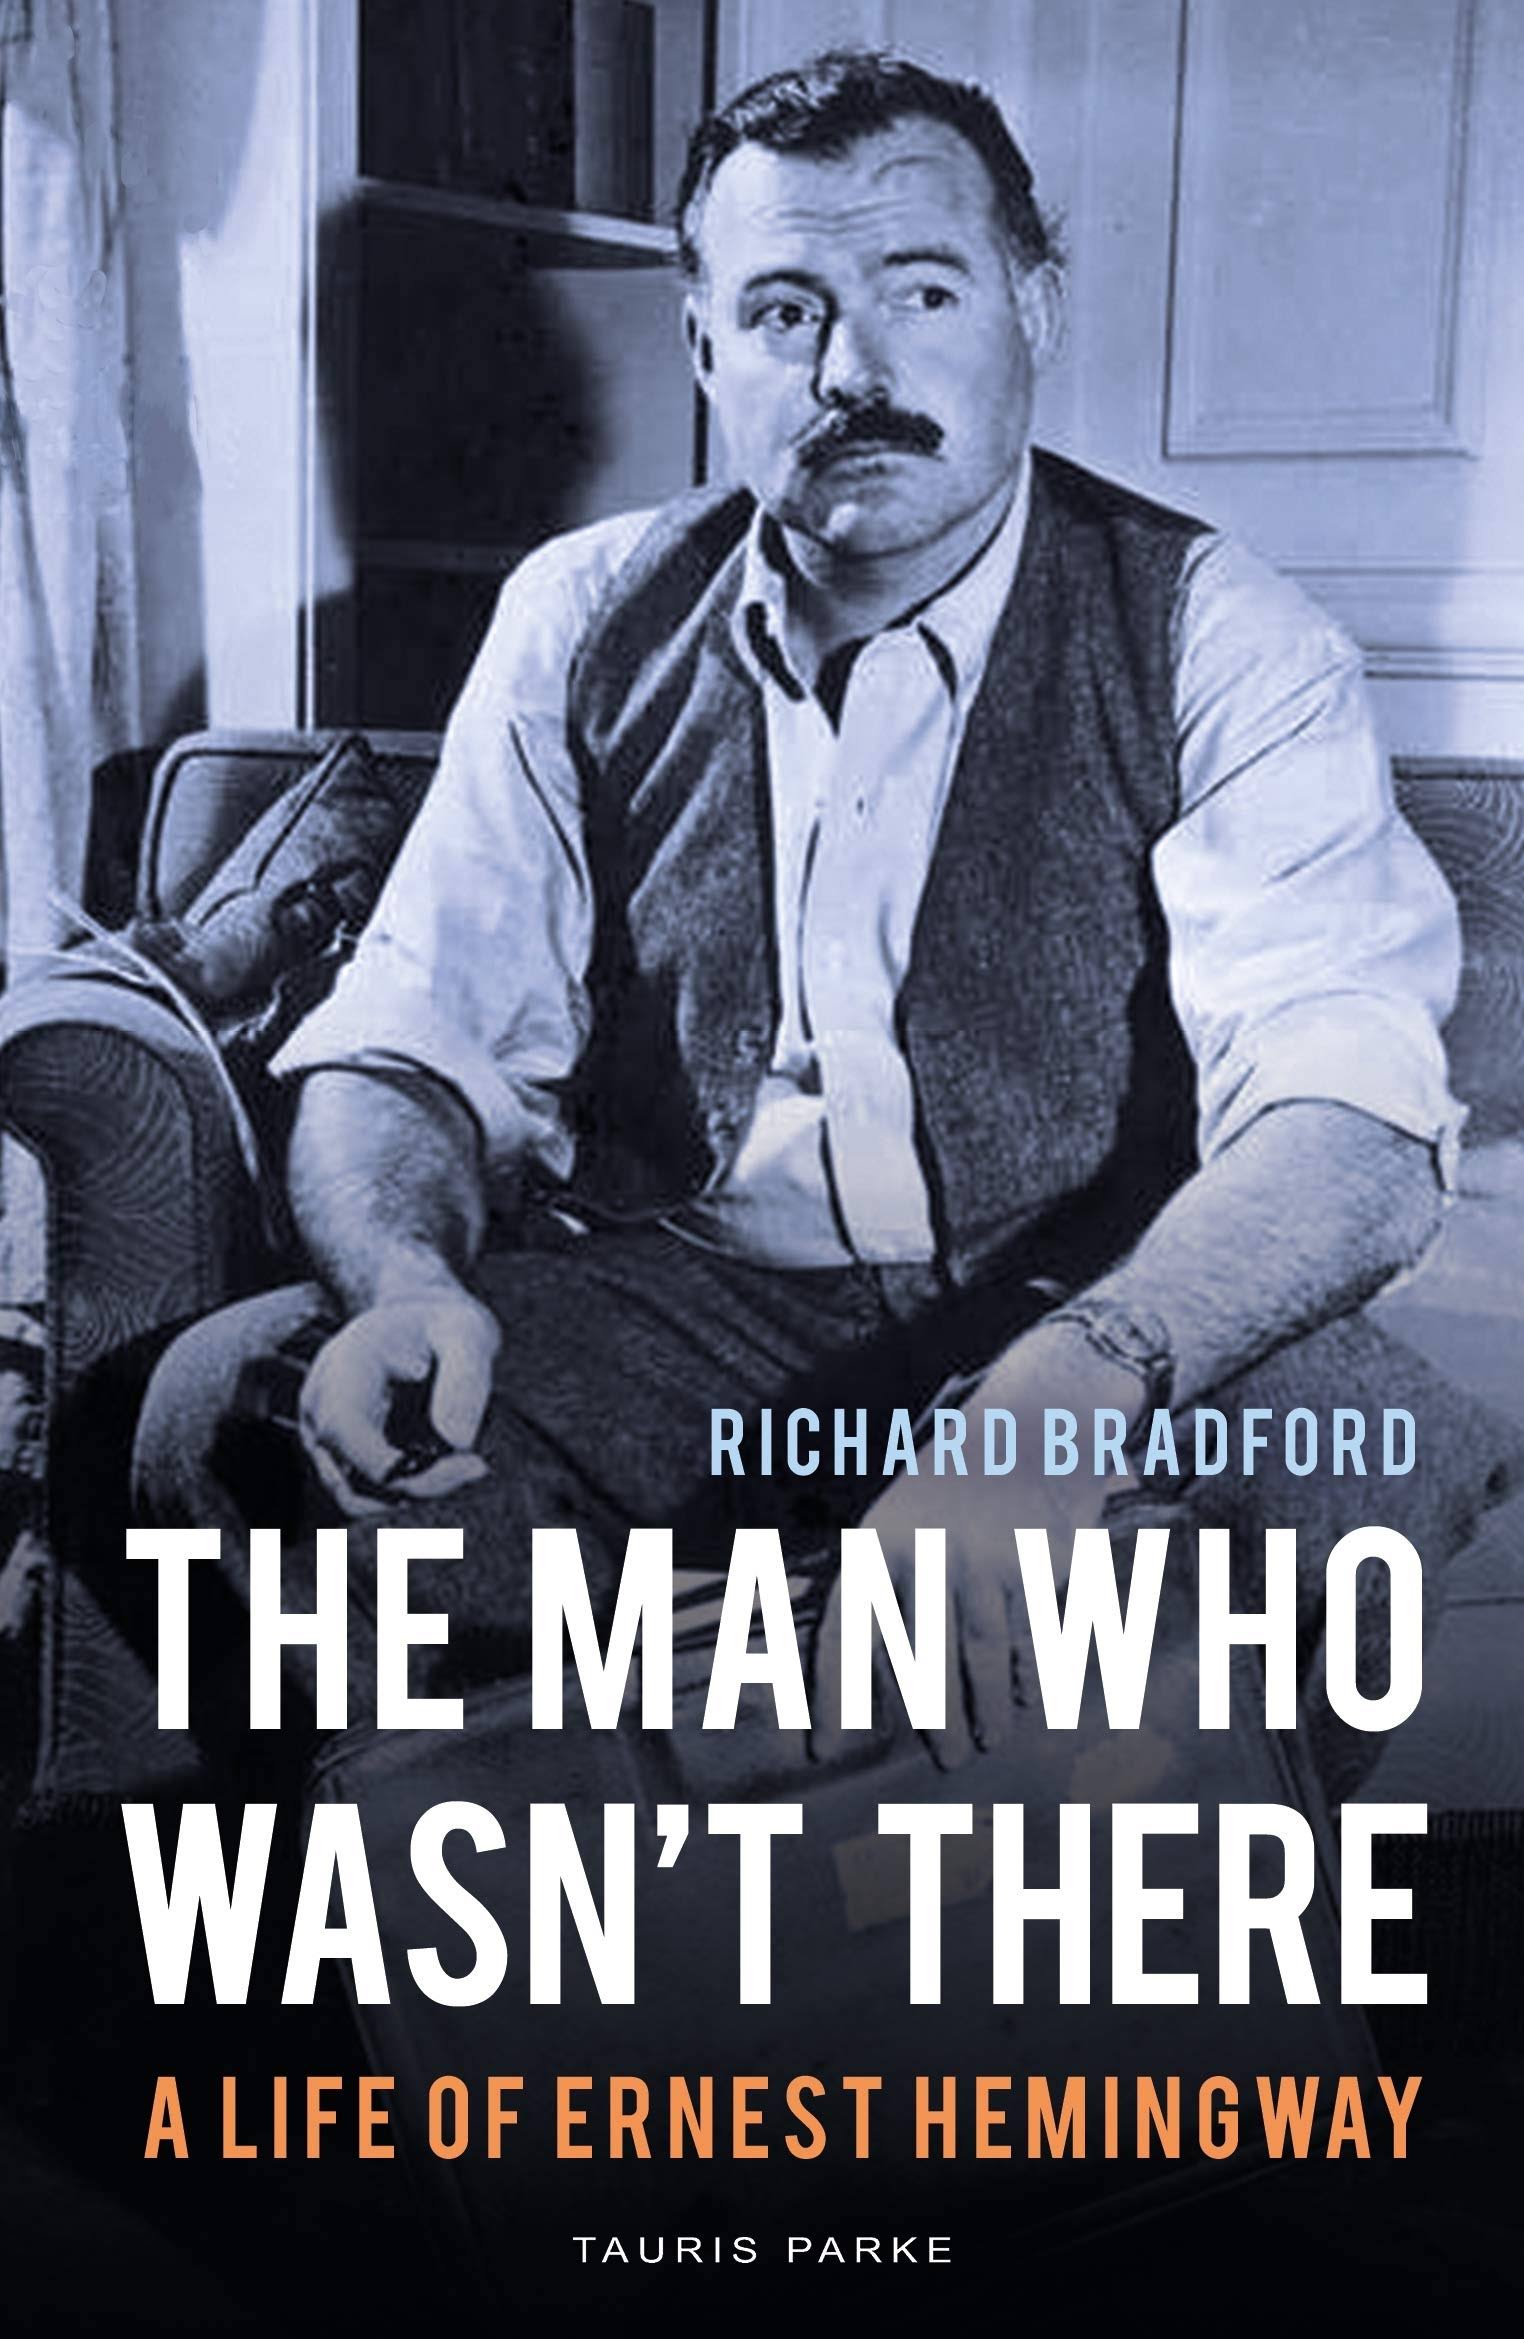 The Man Who Wasn't There - by Richard Bradford